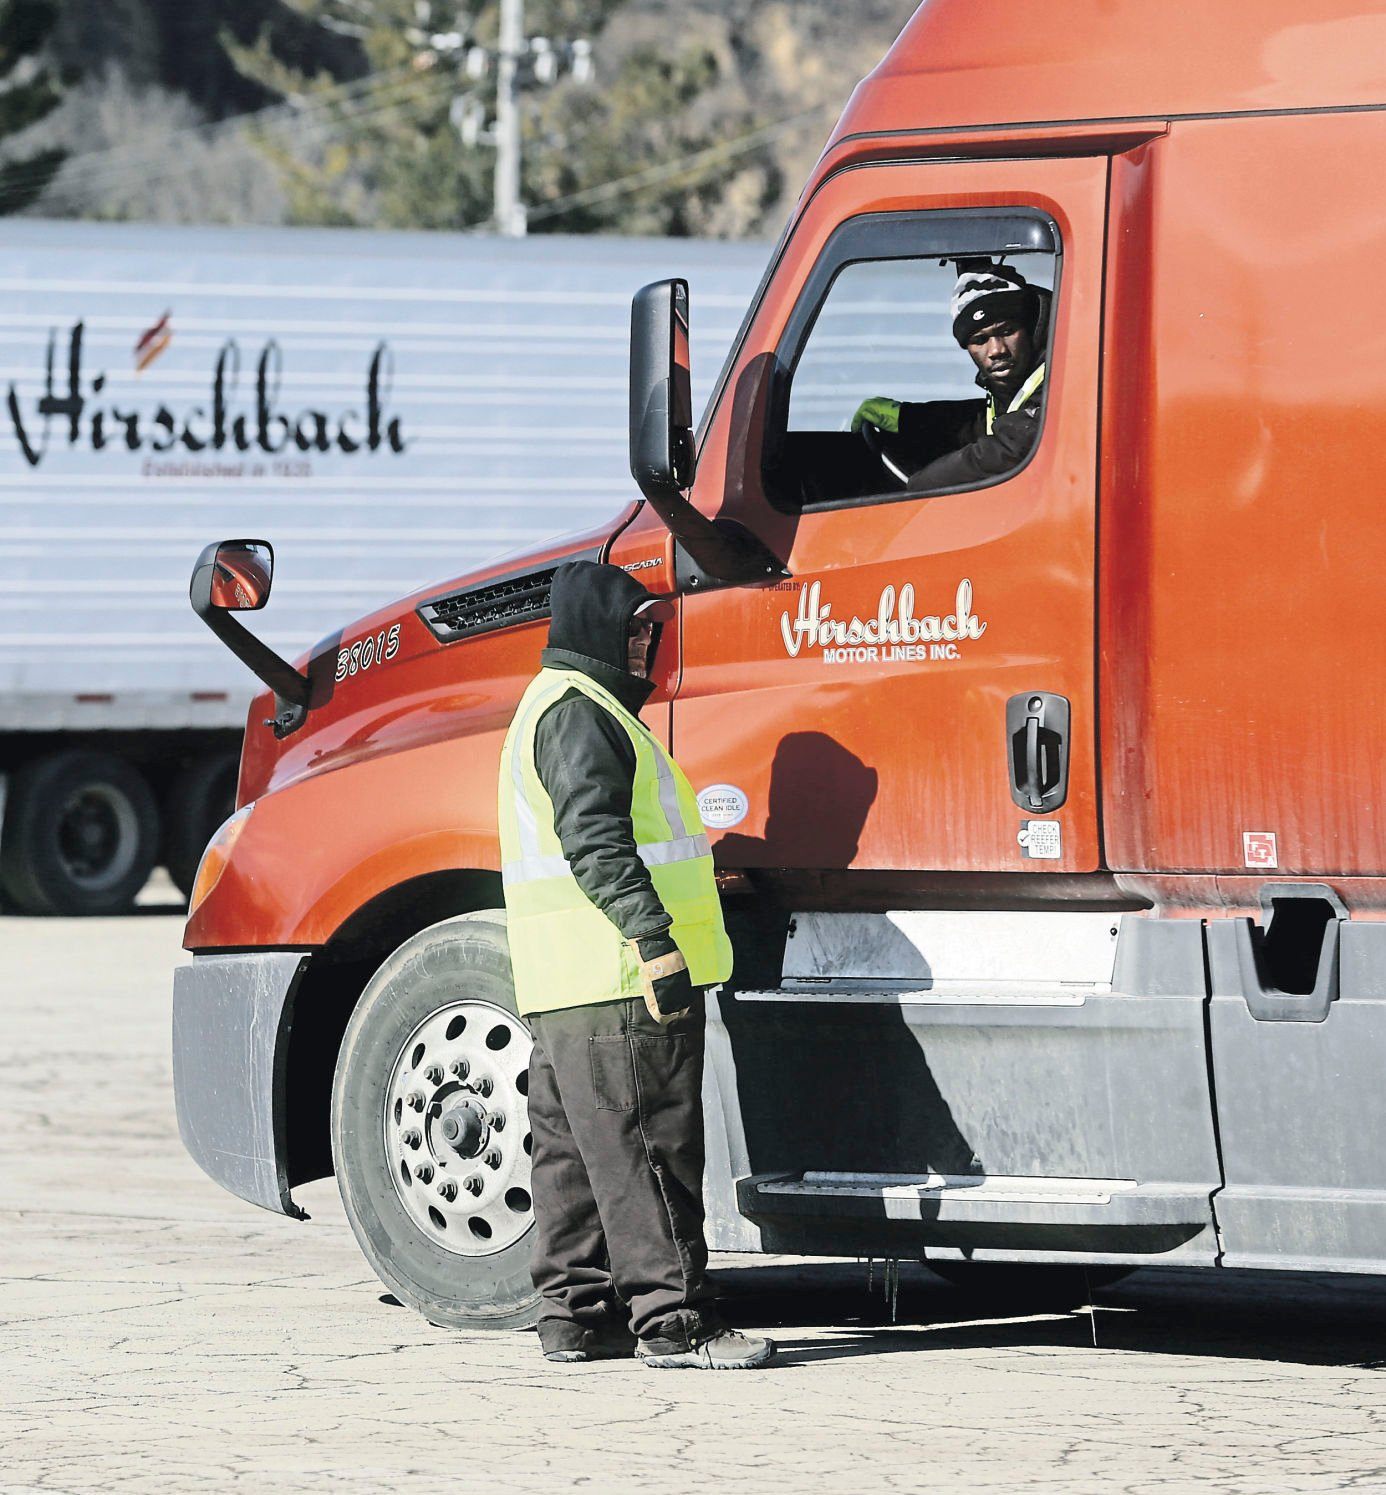 Marty Funke, an instructor at Hirschbach Motor Lines, watches as Mohammed Keita, of Ramsey, Minn., maneuvers his semi-tractor trailer in a parking lot during a commercial driver’s license training program.    PHOTO CREDIT: JESSICA REILLY